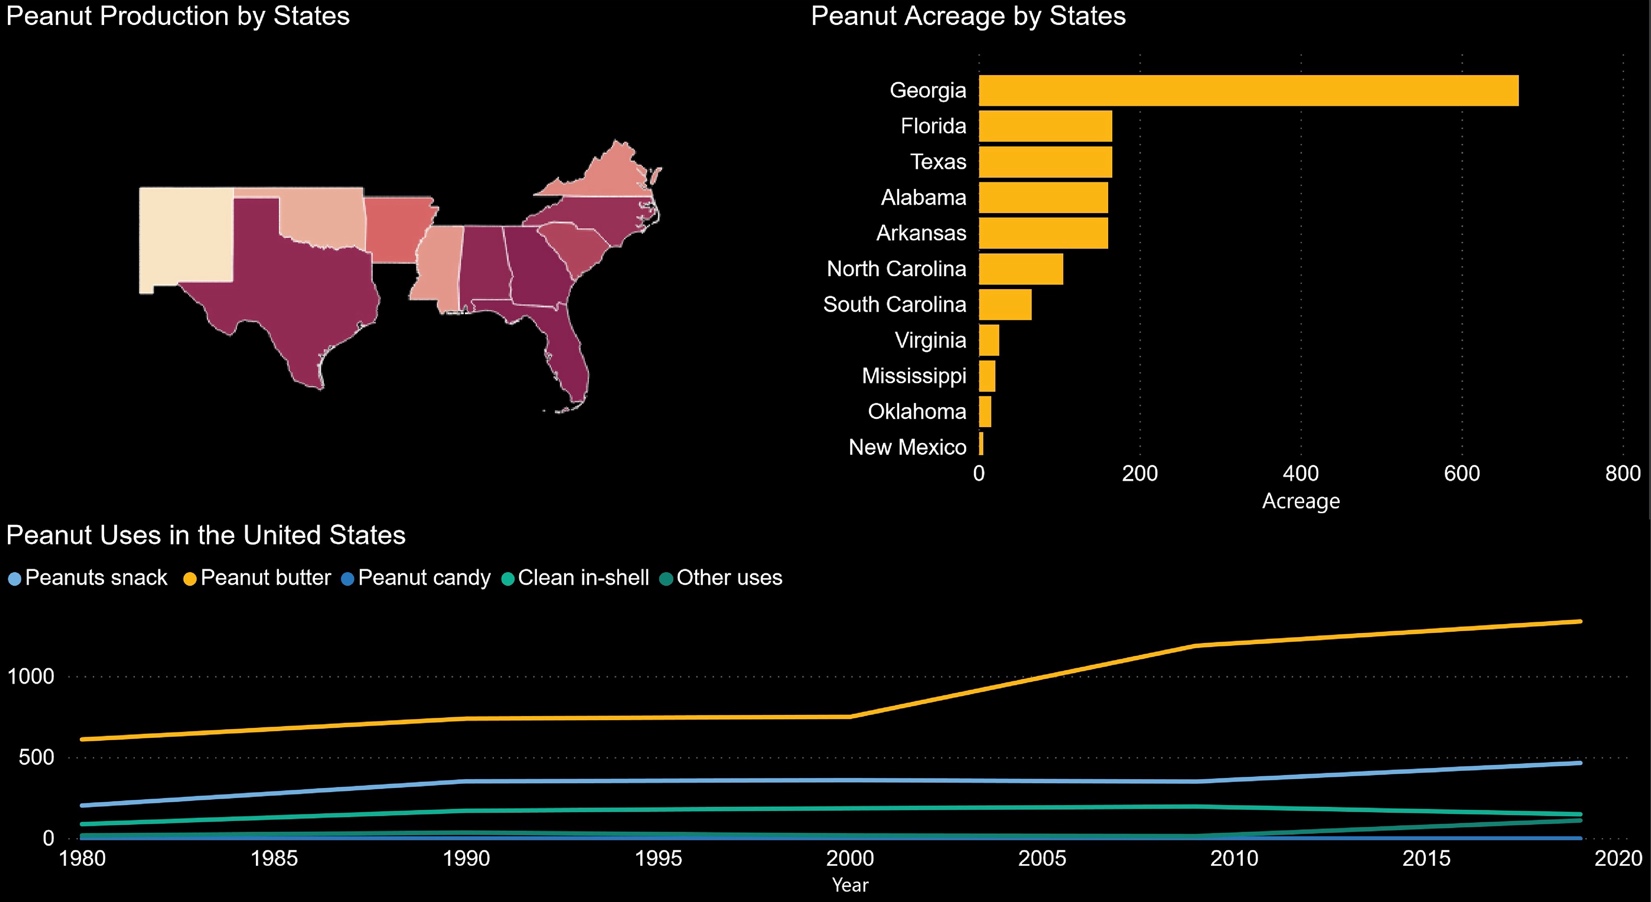 2019 peanut production and acreage by state and peanut uses in the United States including snacks, butter, candy, in-shell, and other uses.